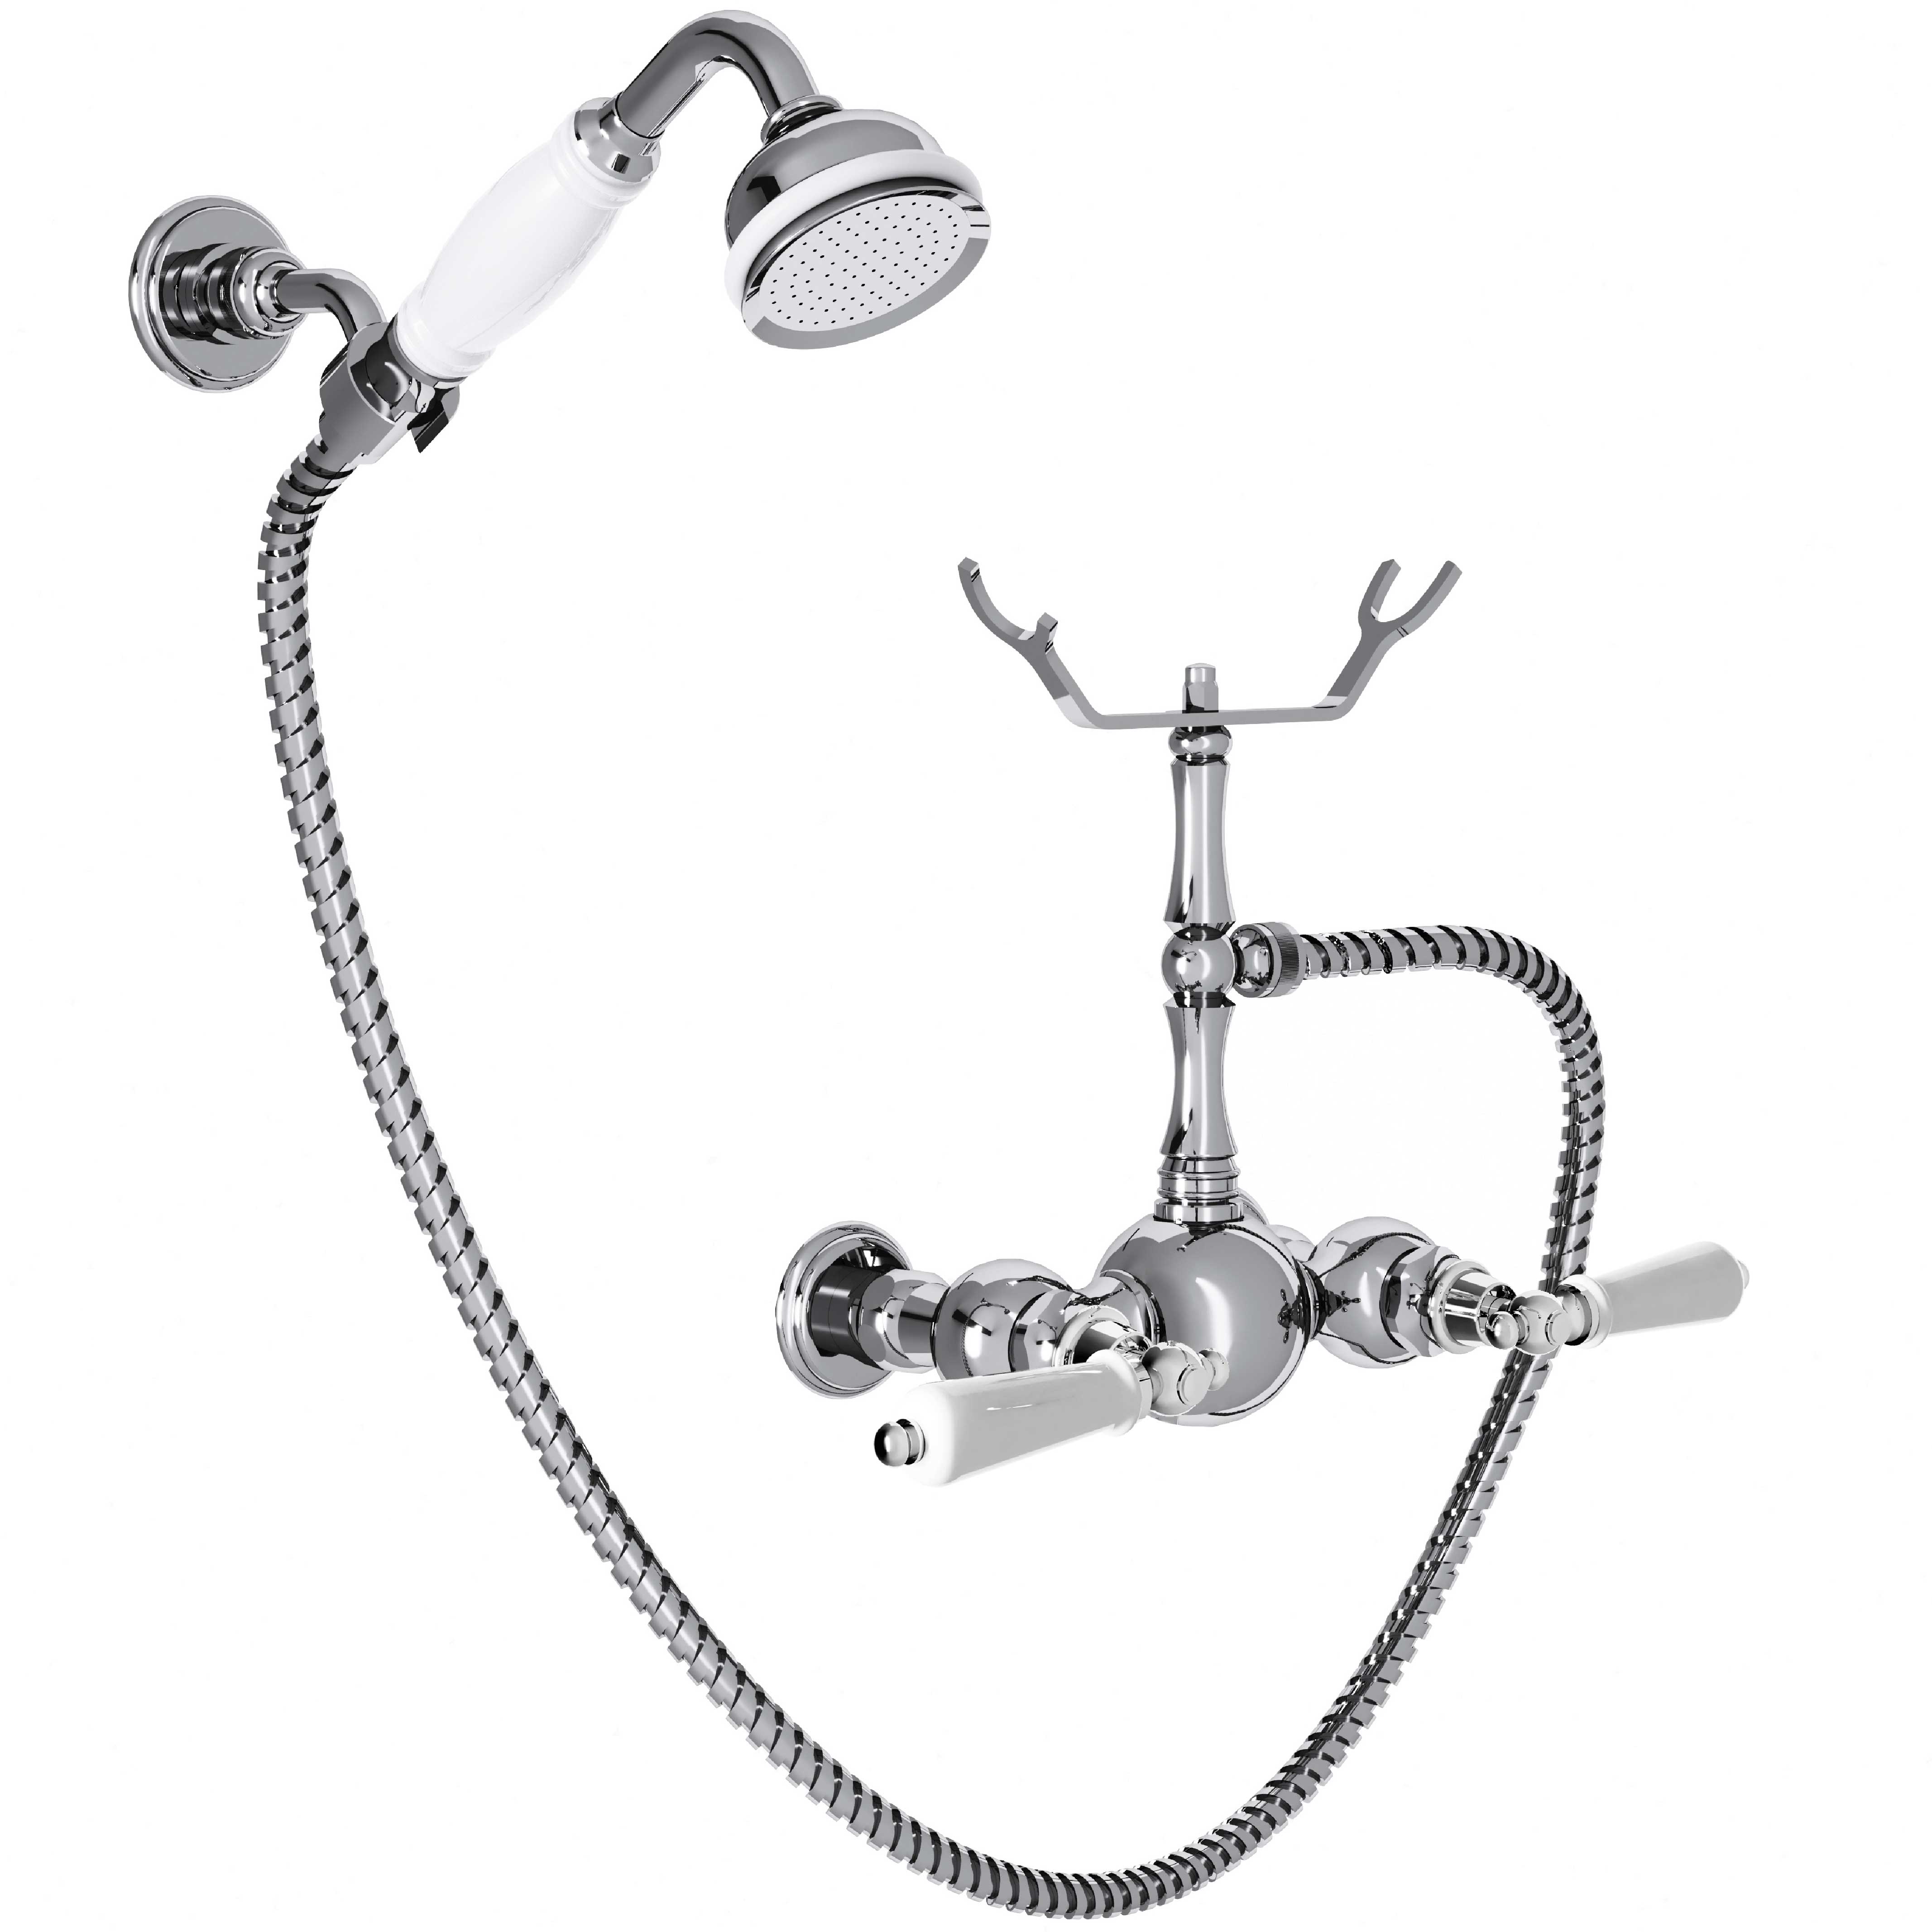 M04-2201 Shower mixer with hook